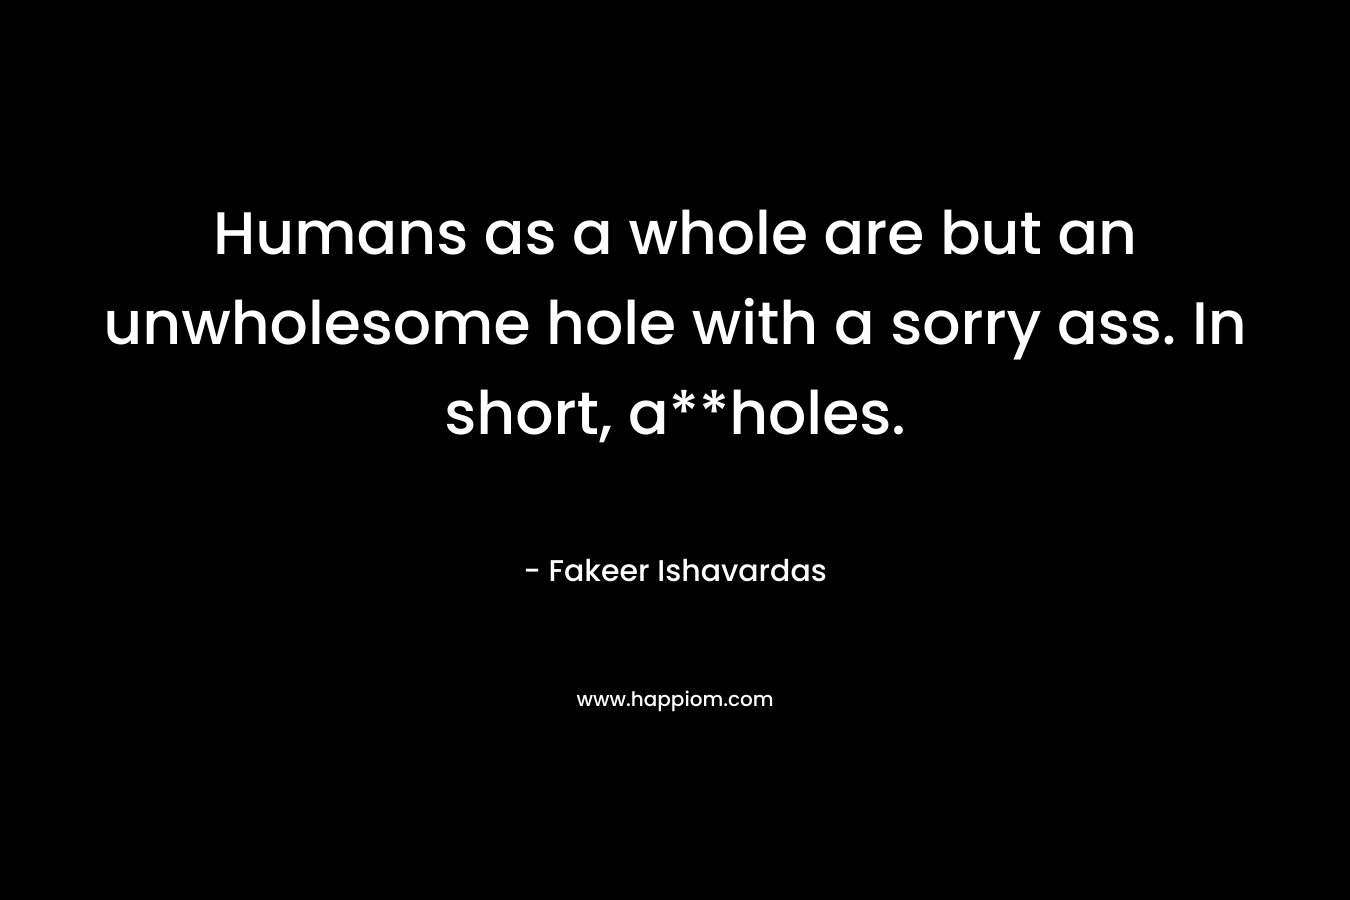 Humans as a whole are but an unwholesome hole with a sorry ass. In short, a**holes. – Fakeer Ishavardas